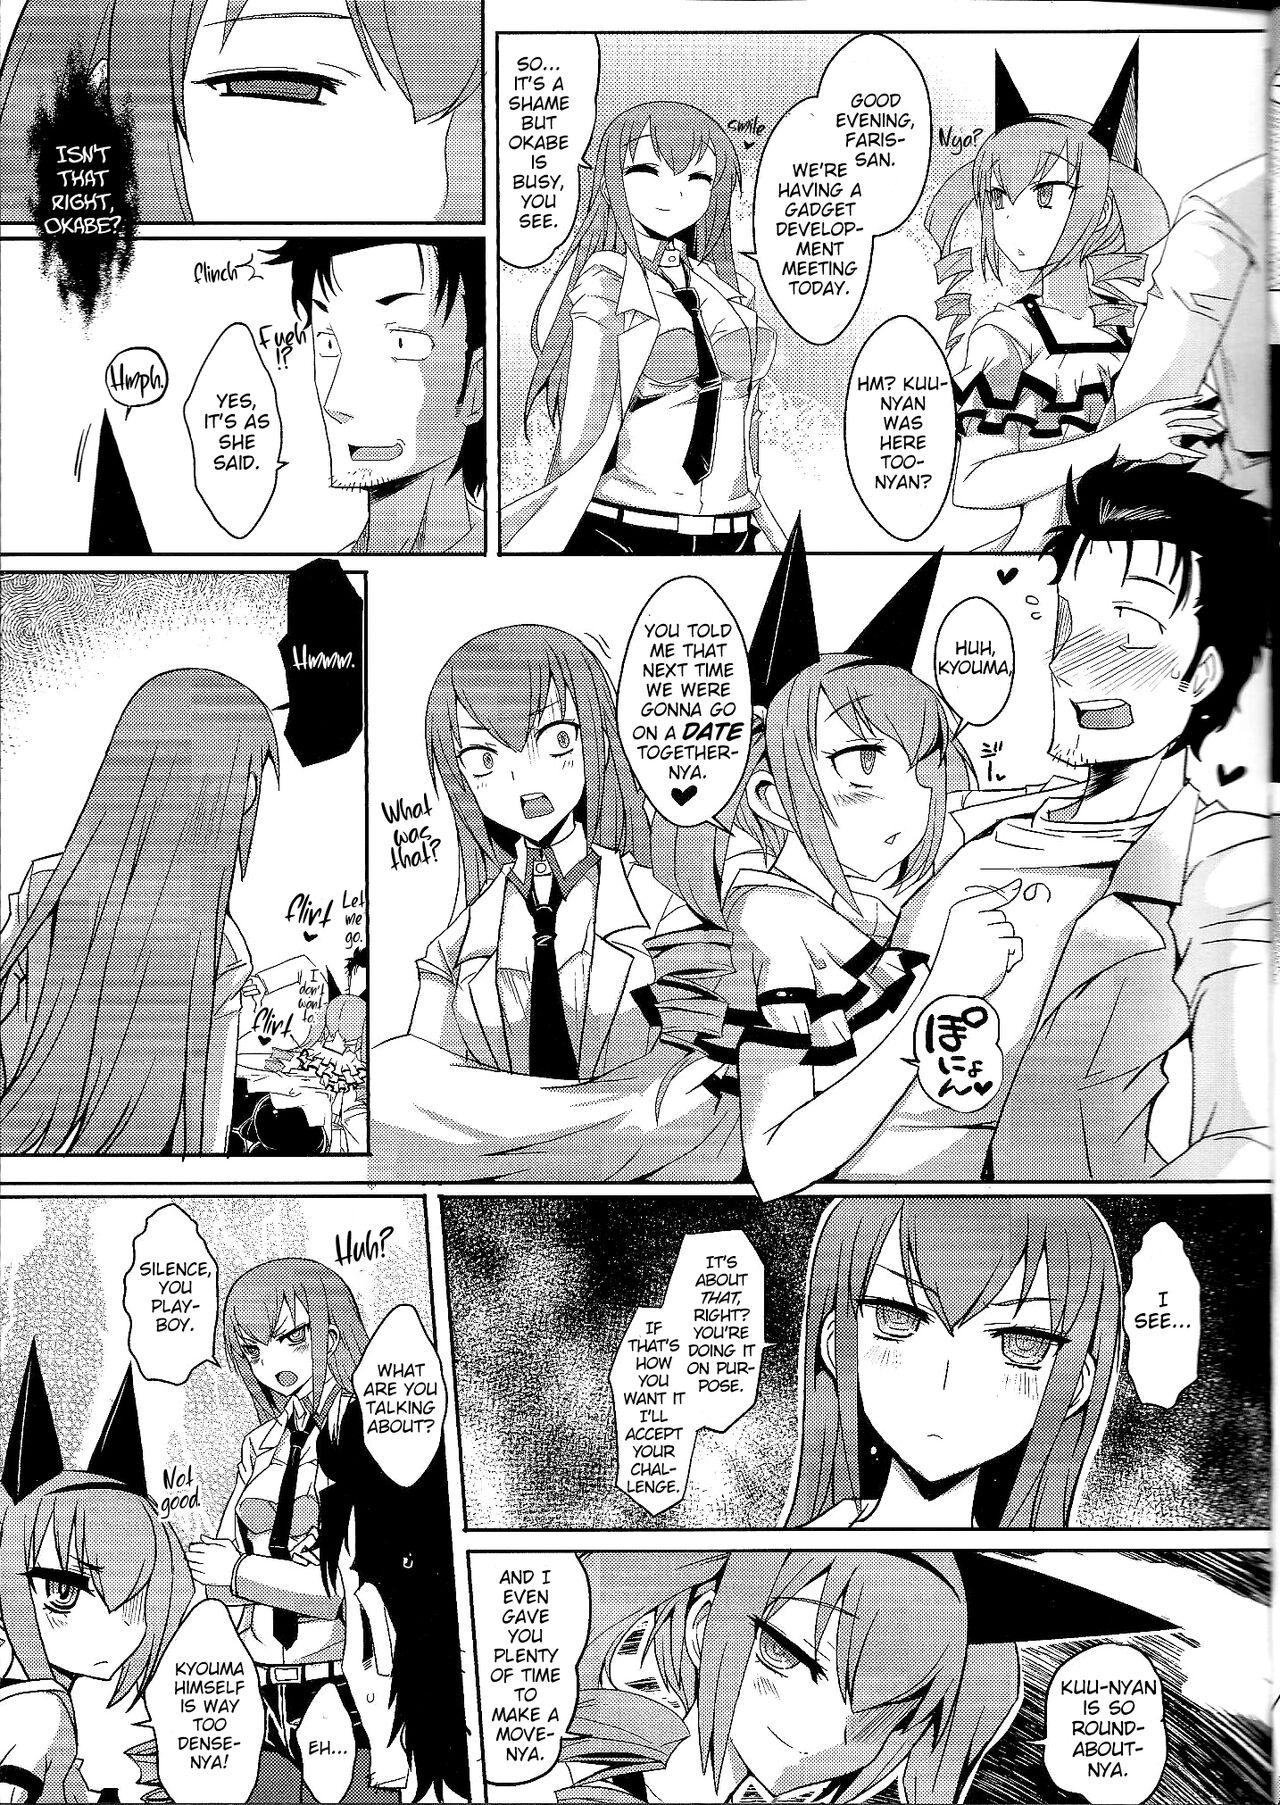 Cuckolding Kenjin Chijou no Sodoministers - Steinsgate Job - Page 6